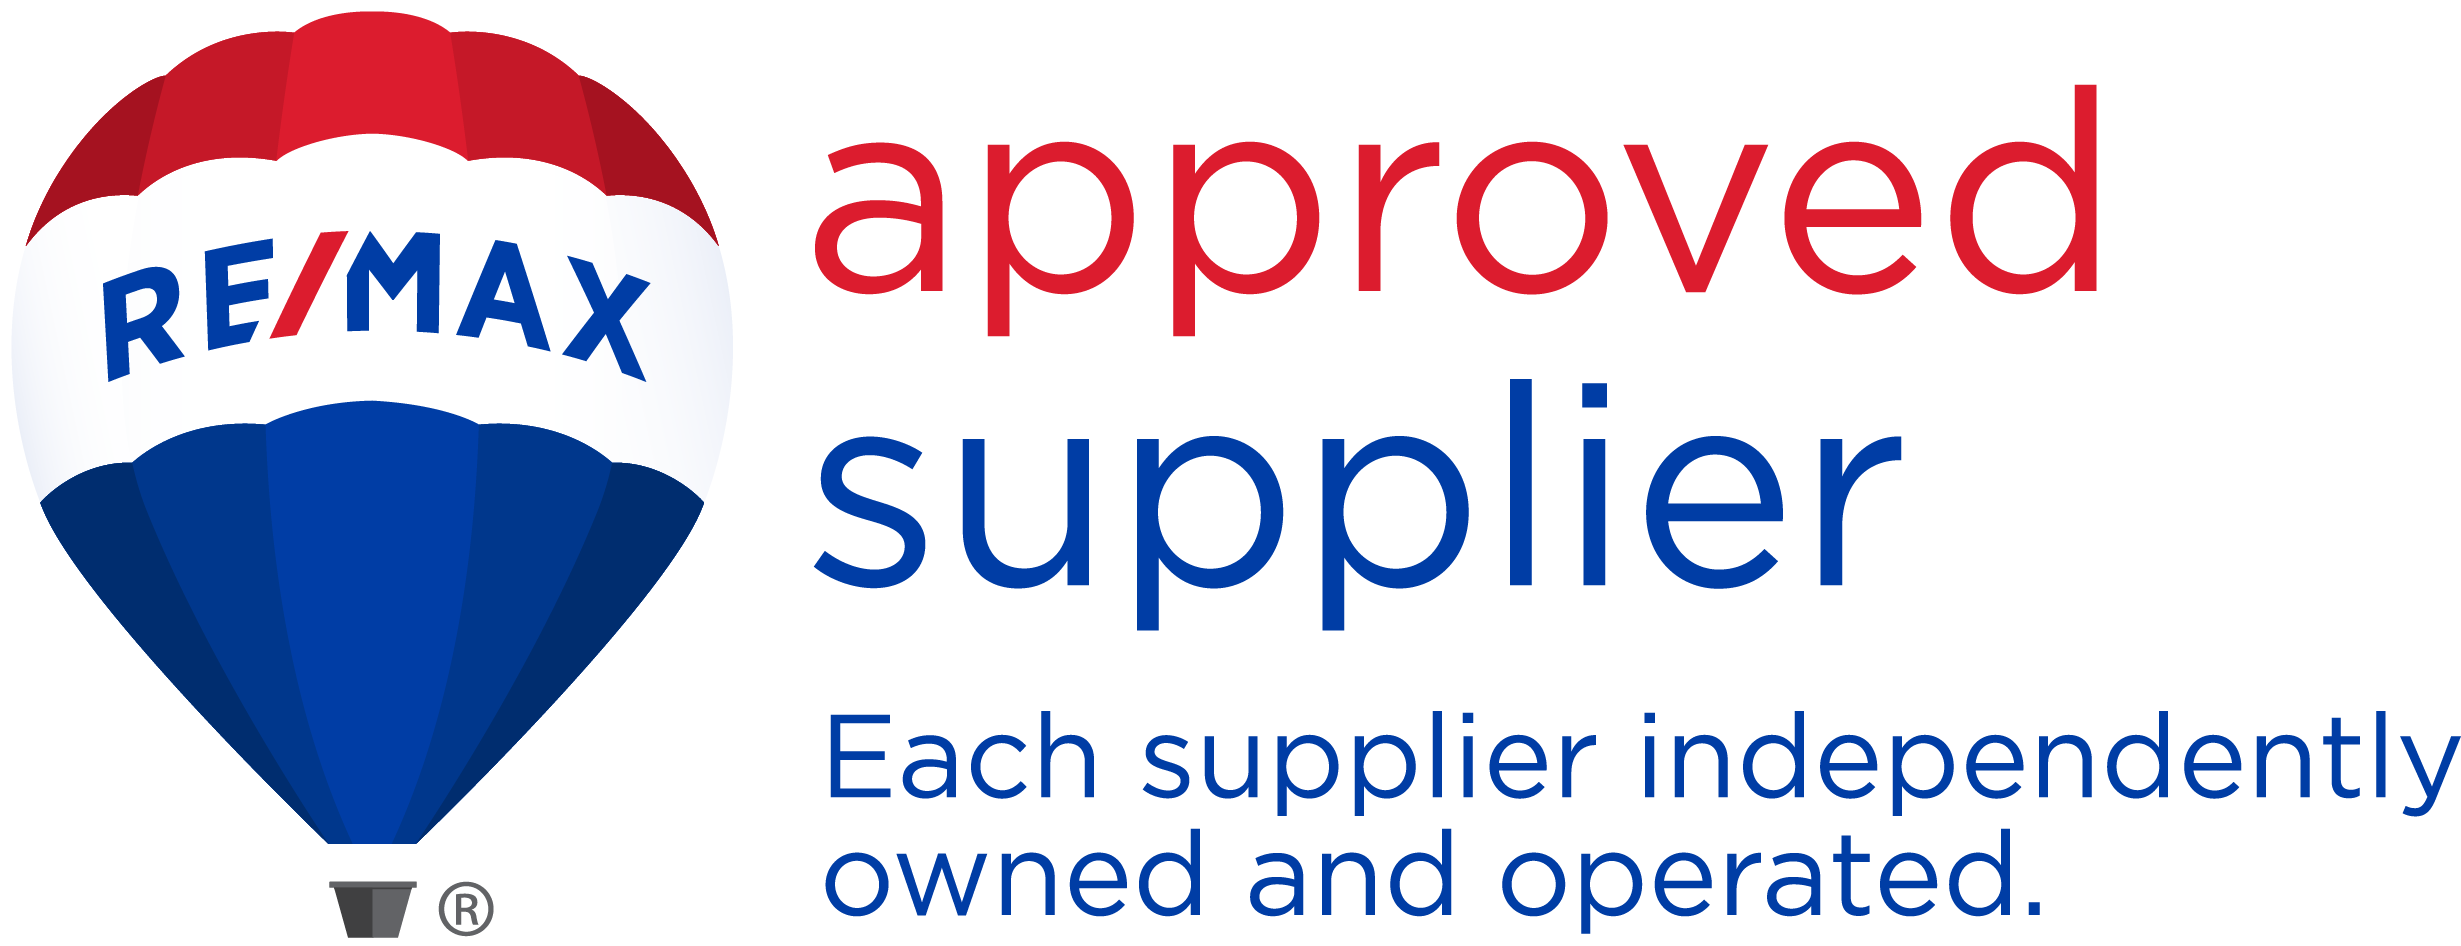 REMAX Approved Supplier logo